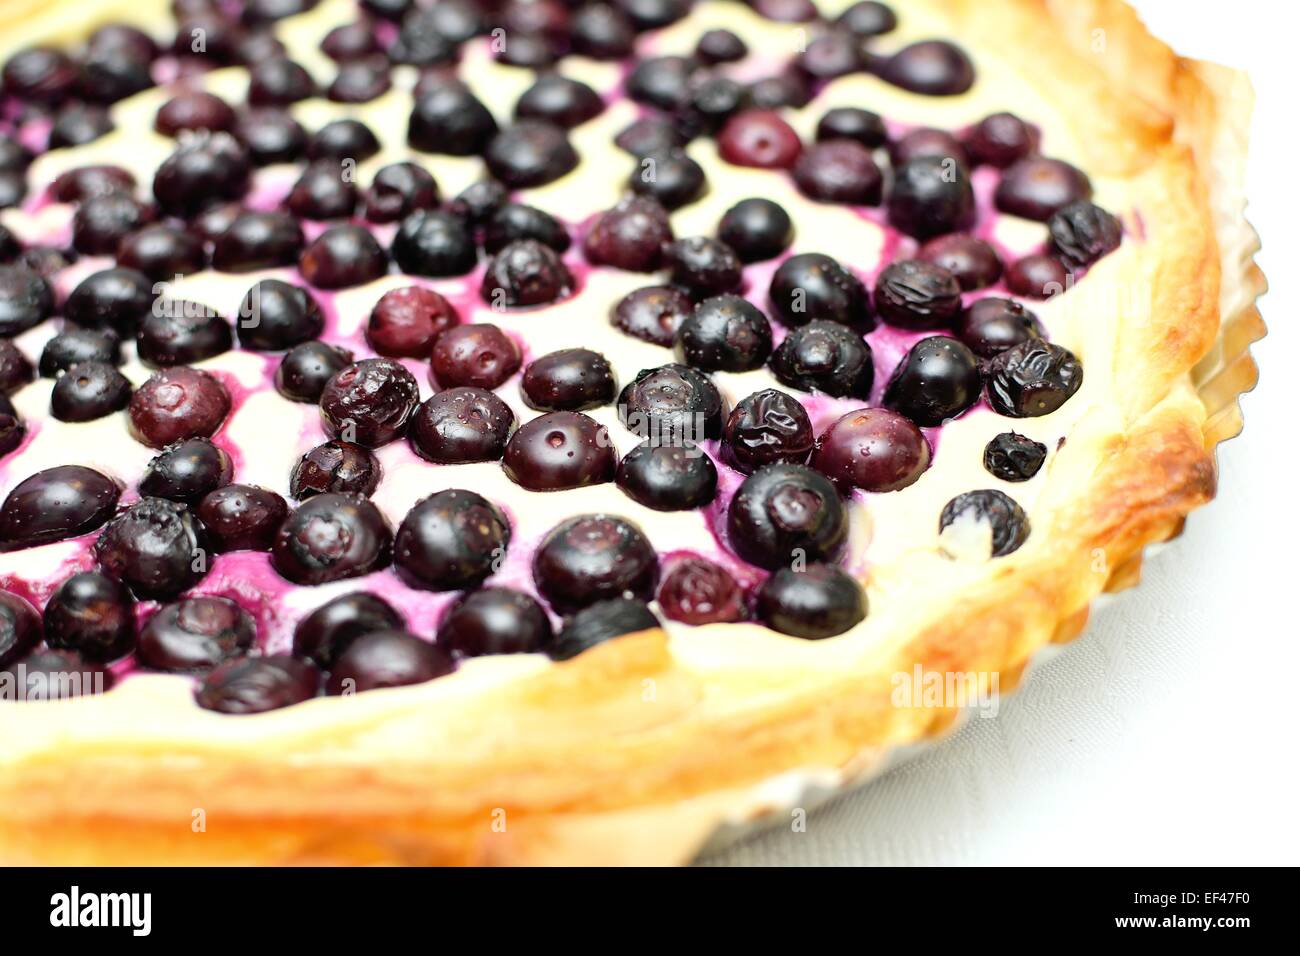 Closeup shot of the blueberry cheese pie in a form. Stock Photo